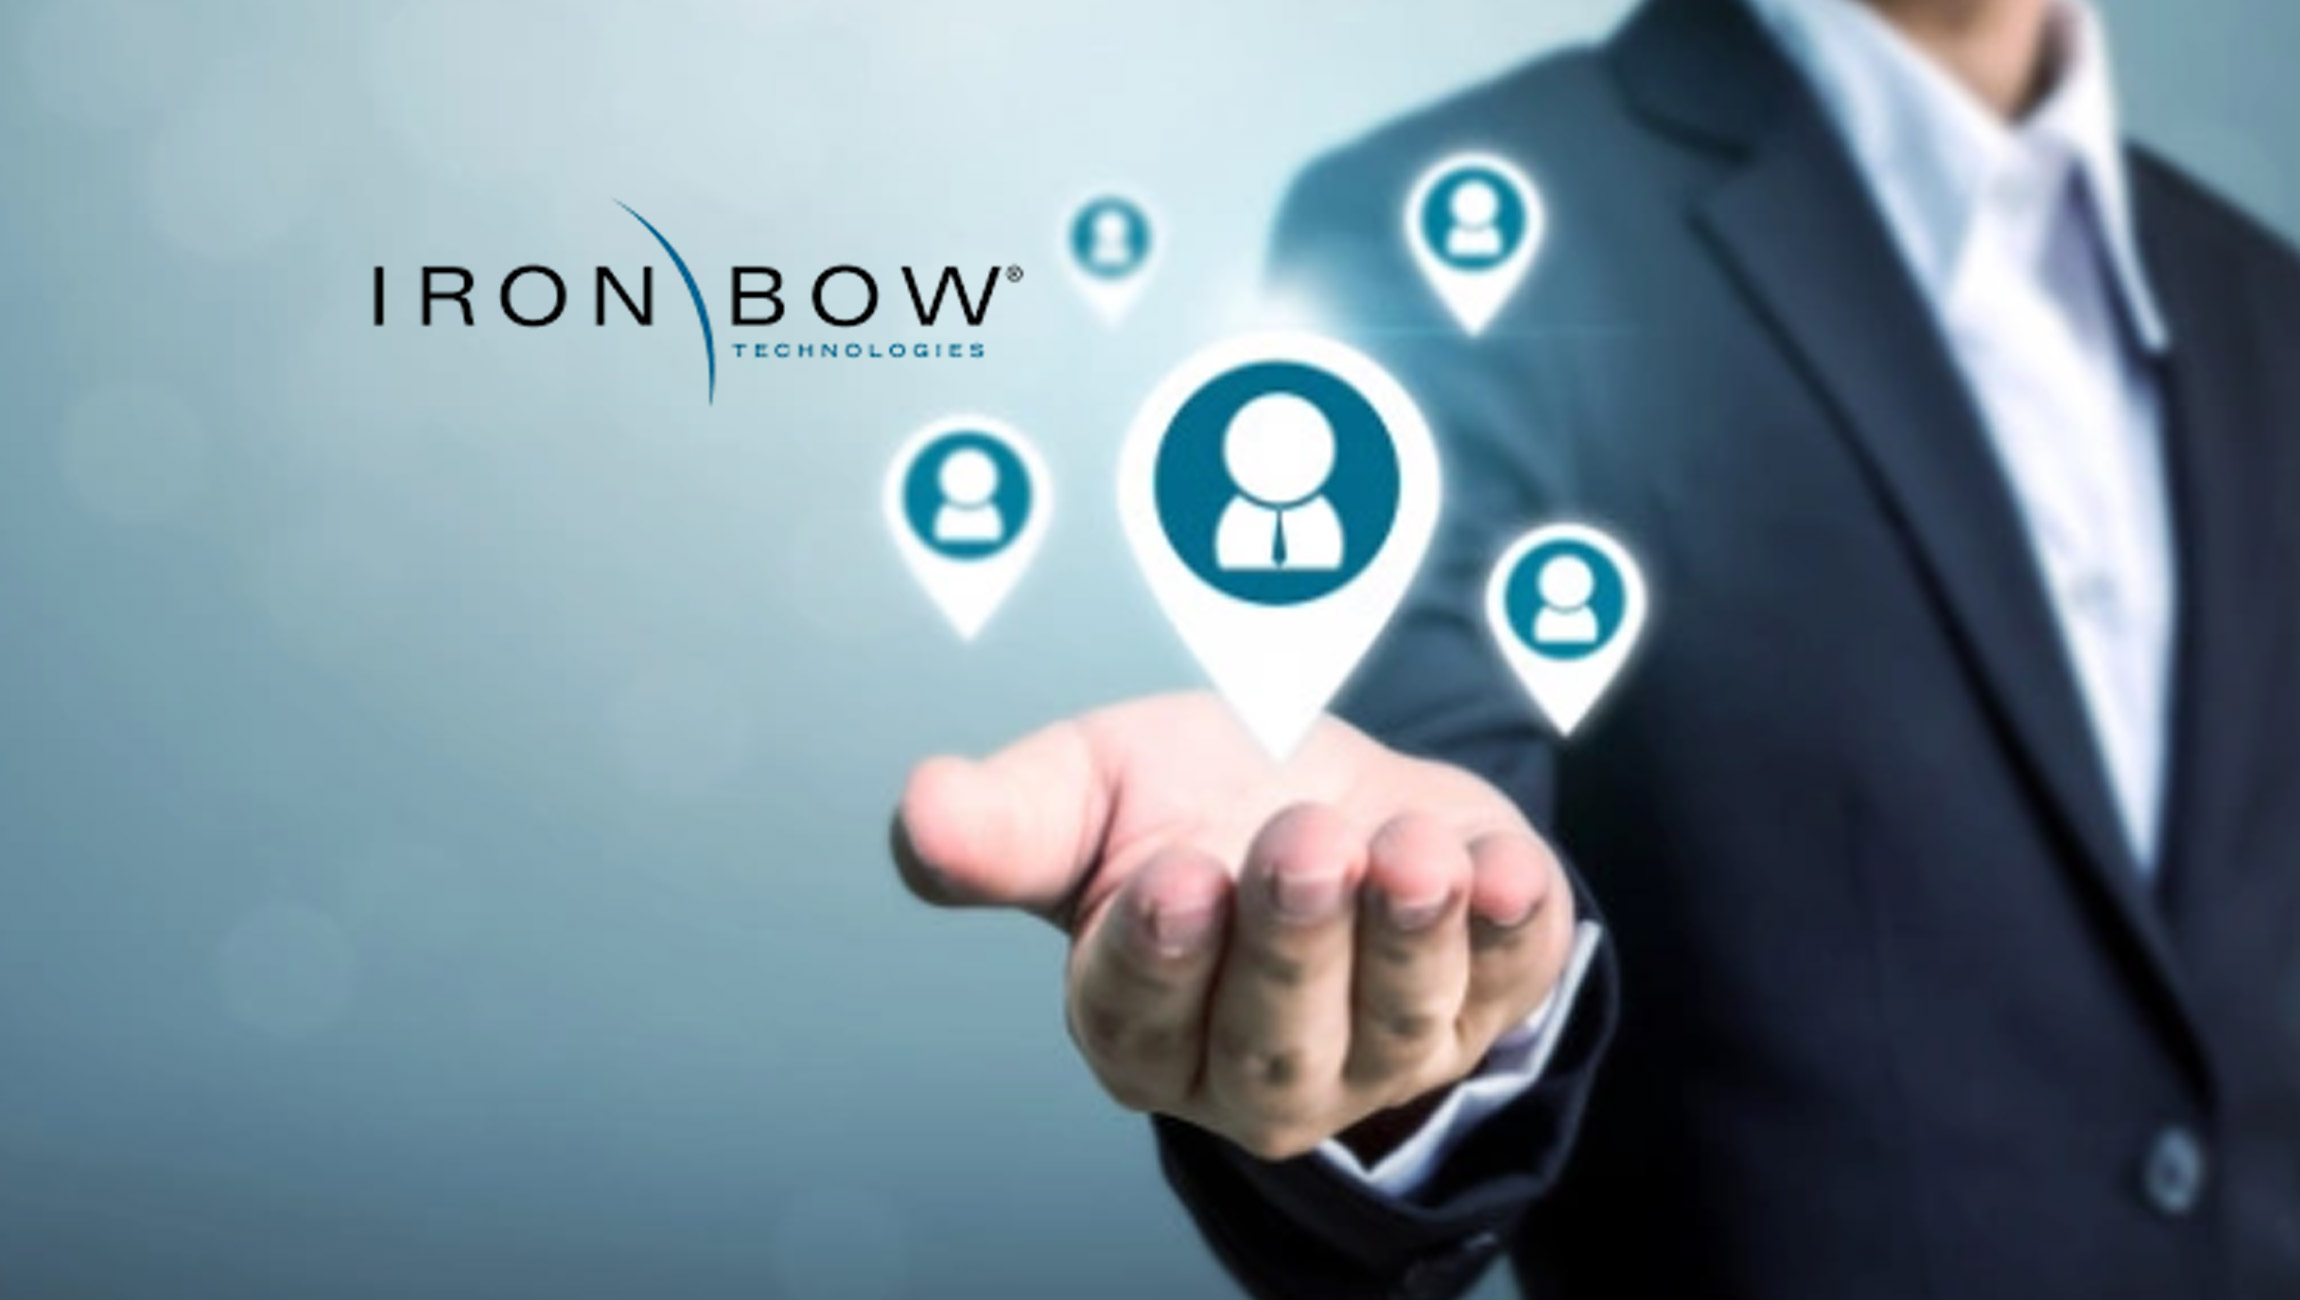 Iron Bow Technologies Appoints Federal Market Leader, Sean Robertson, as Senior Vice President of Sales Operations